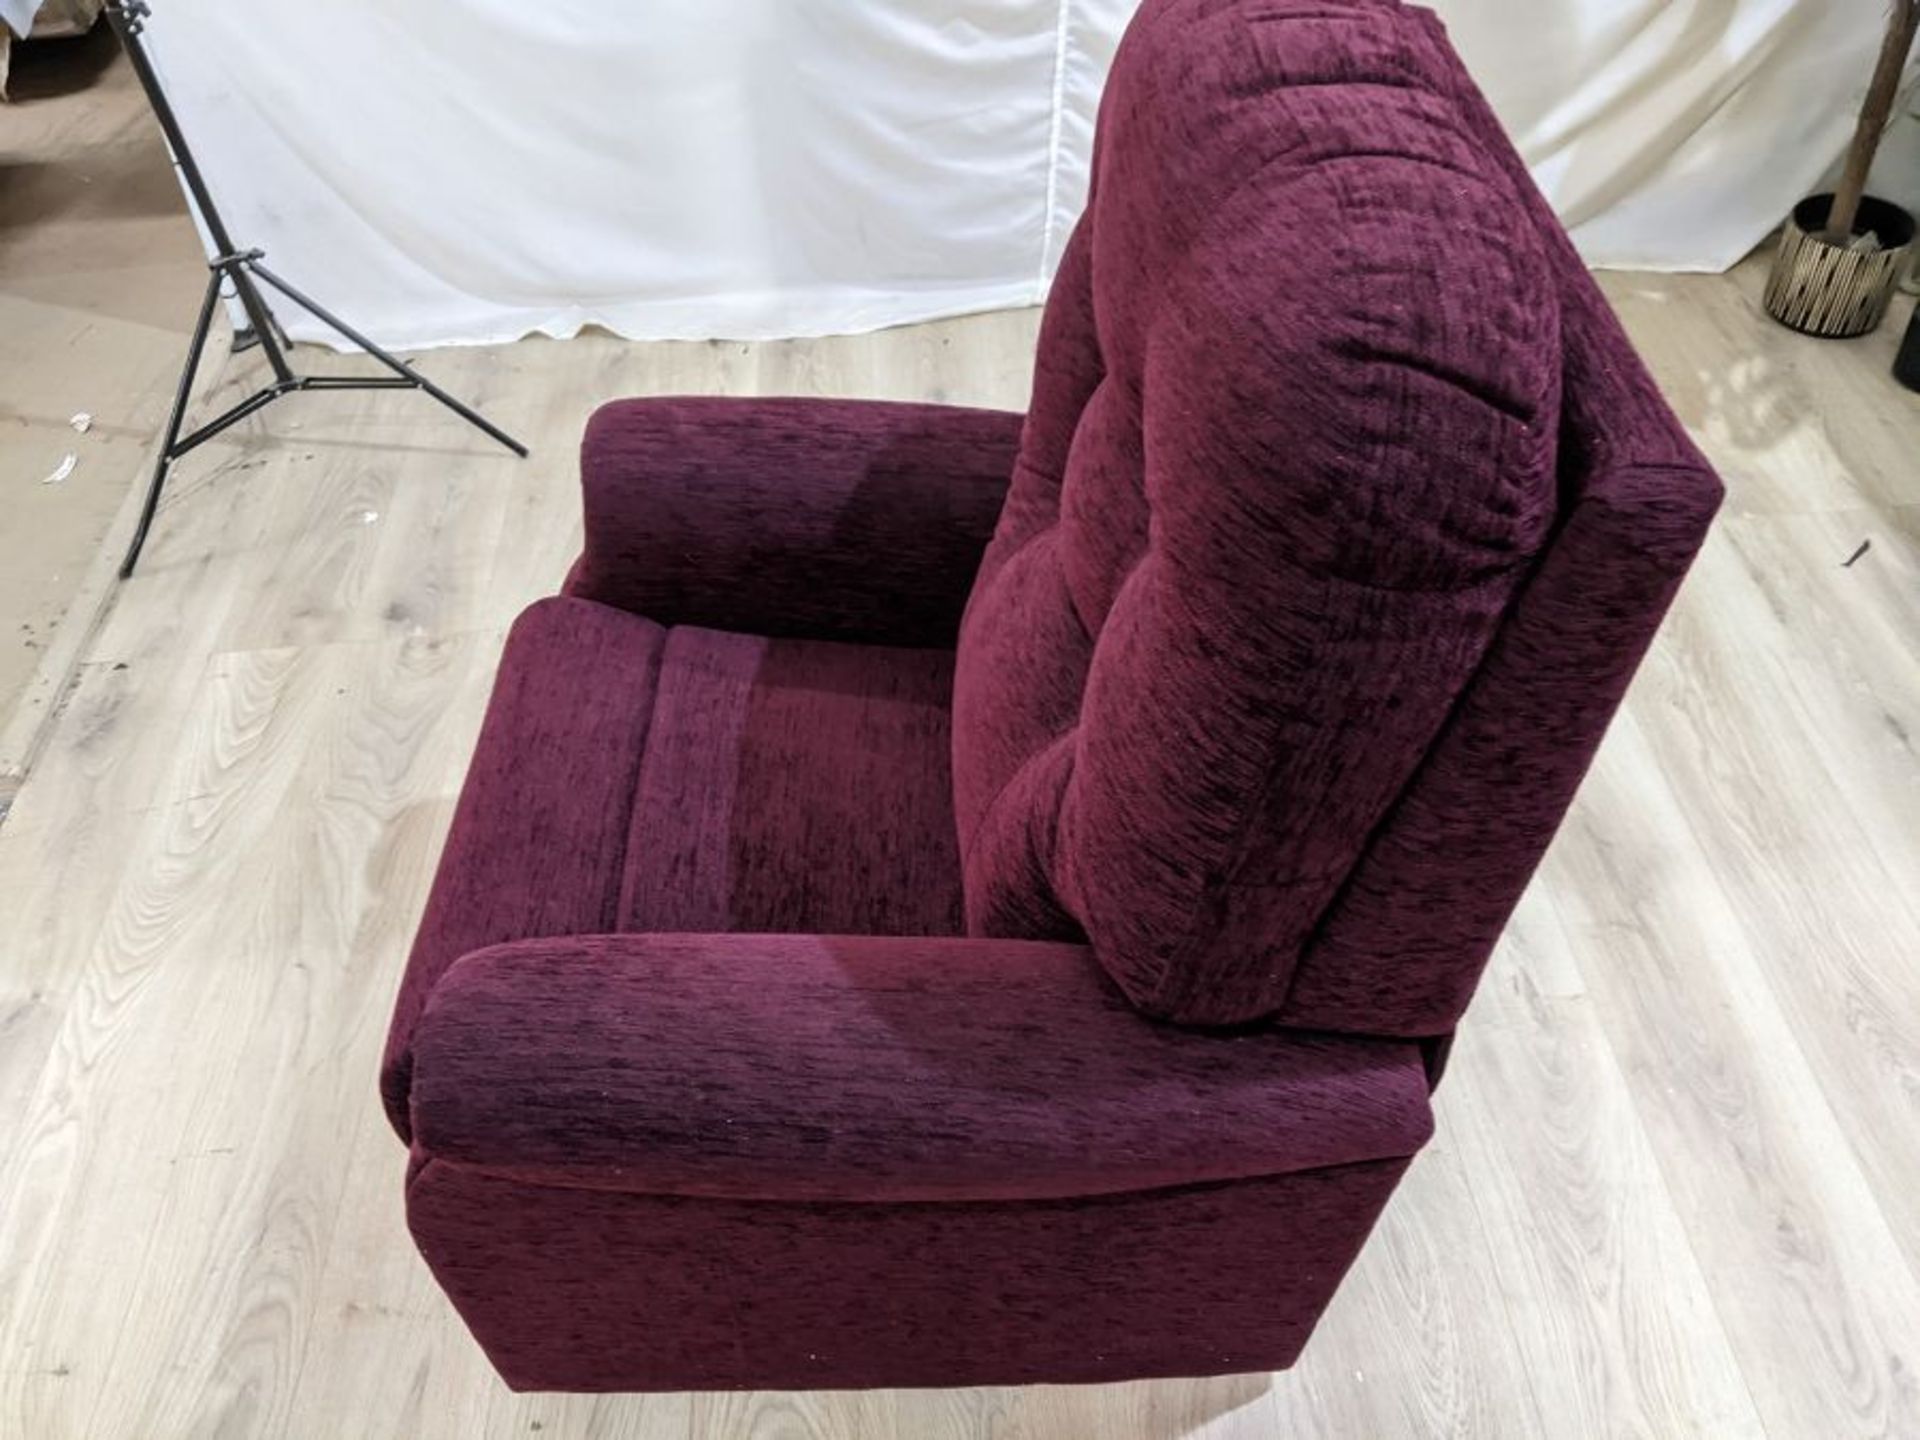 HSL Bicester Medium Single Rise and Recline in Vienna Rum RRP £1632.00 - Image 4 of 5